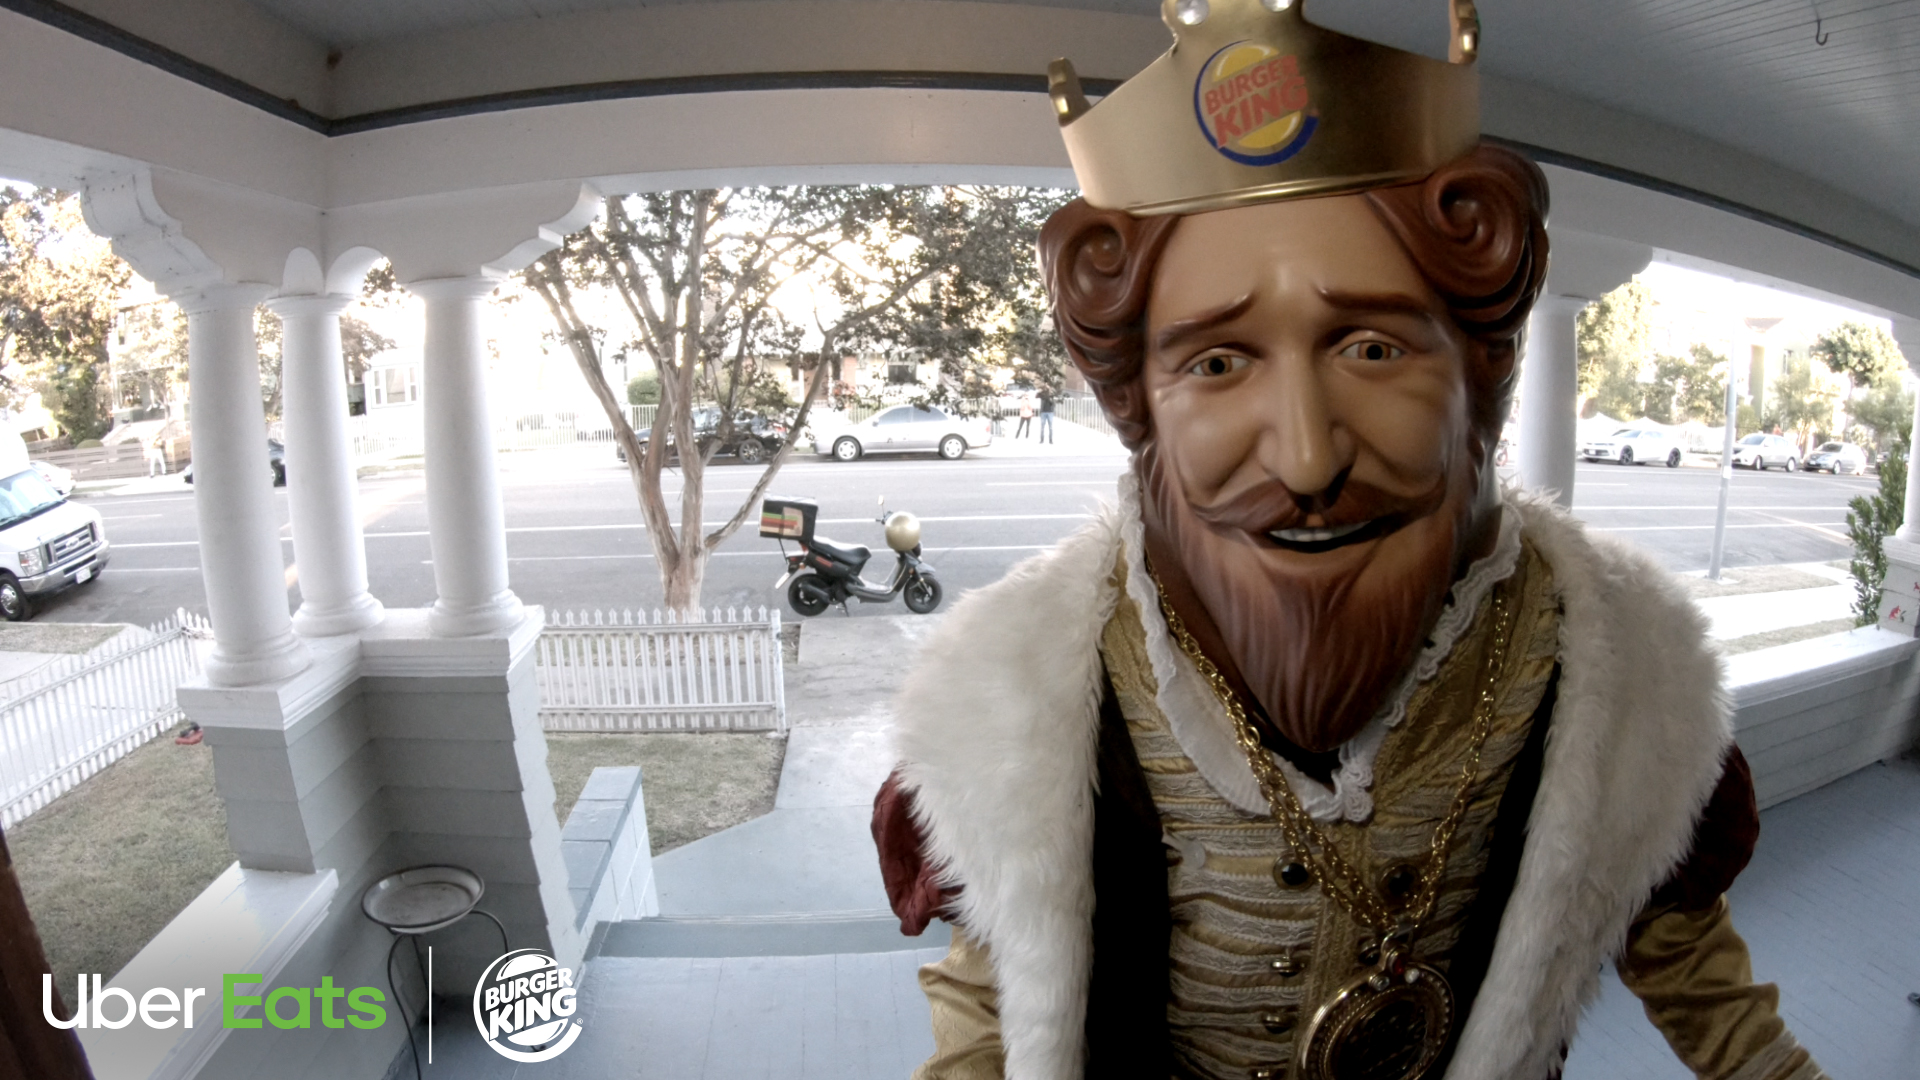 Burger King’s Mascot Hand-Delivers Food Through Uber Eats in this Latest Stunt from MullenLowe